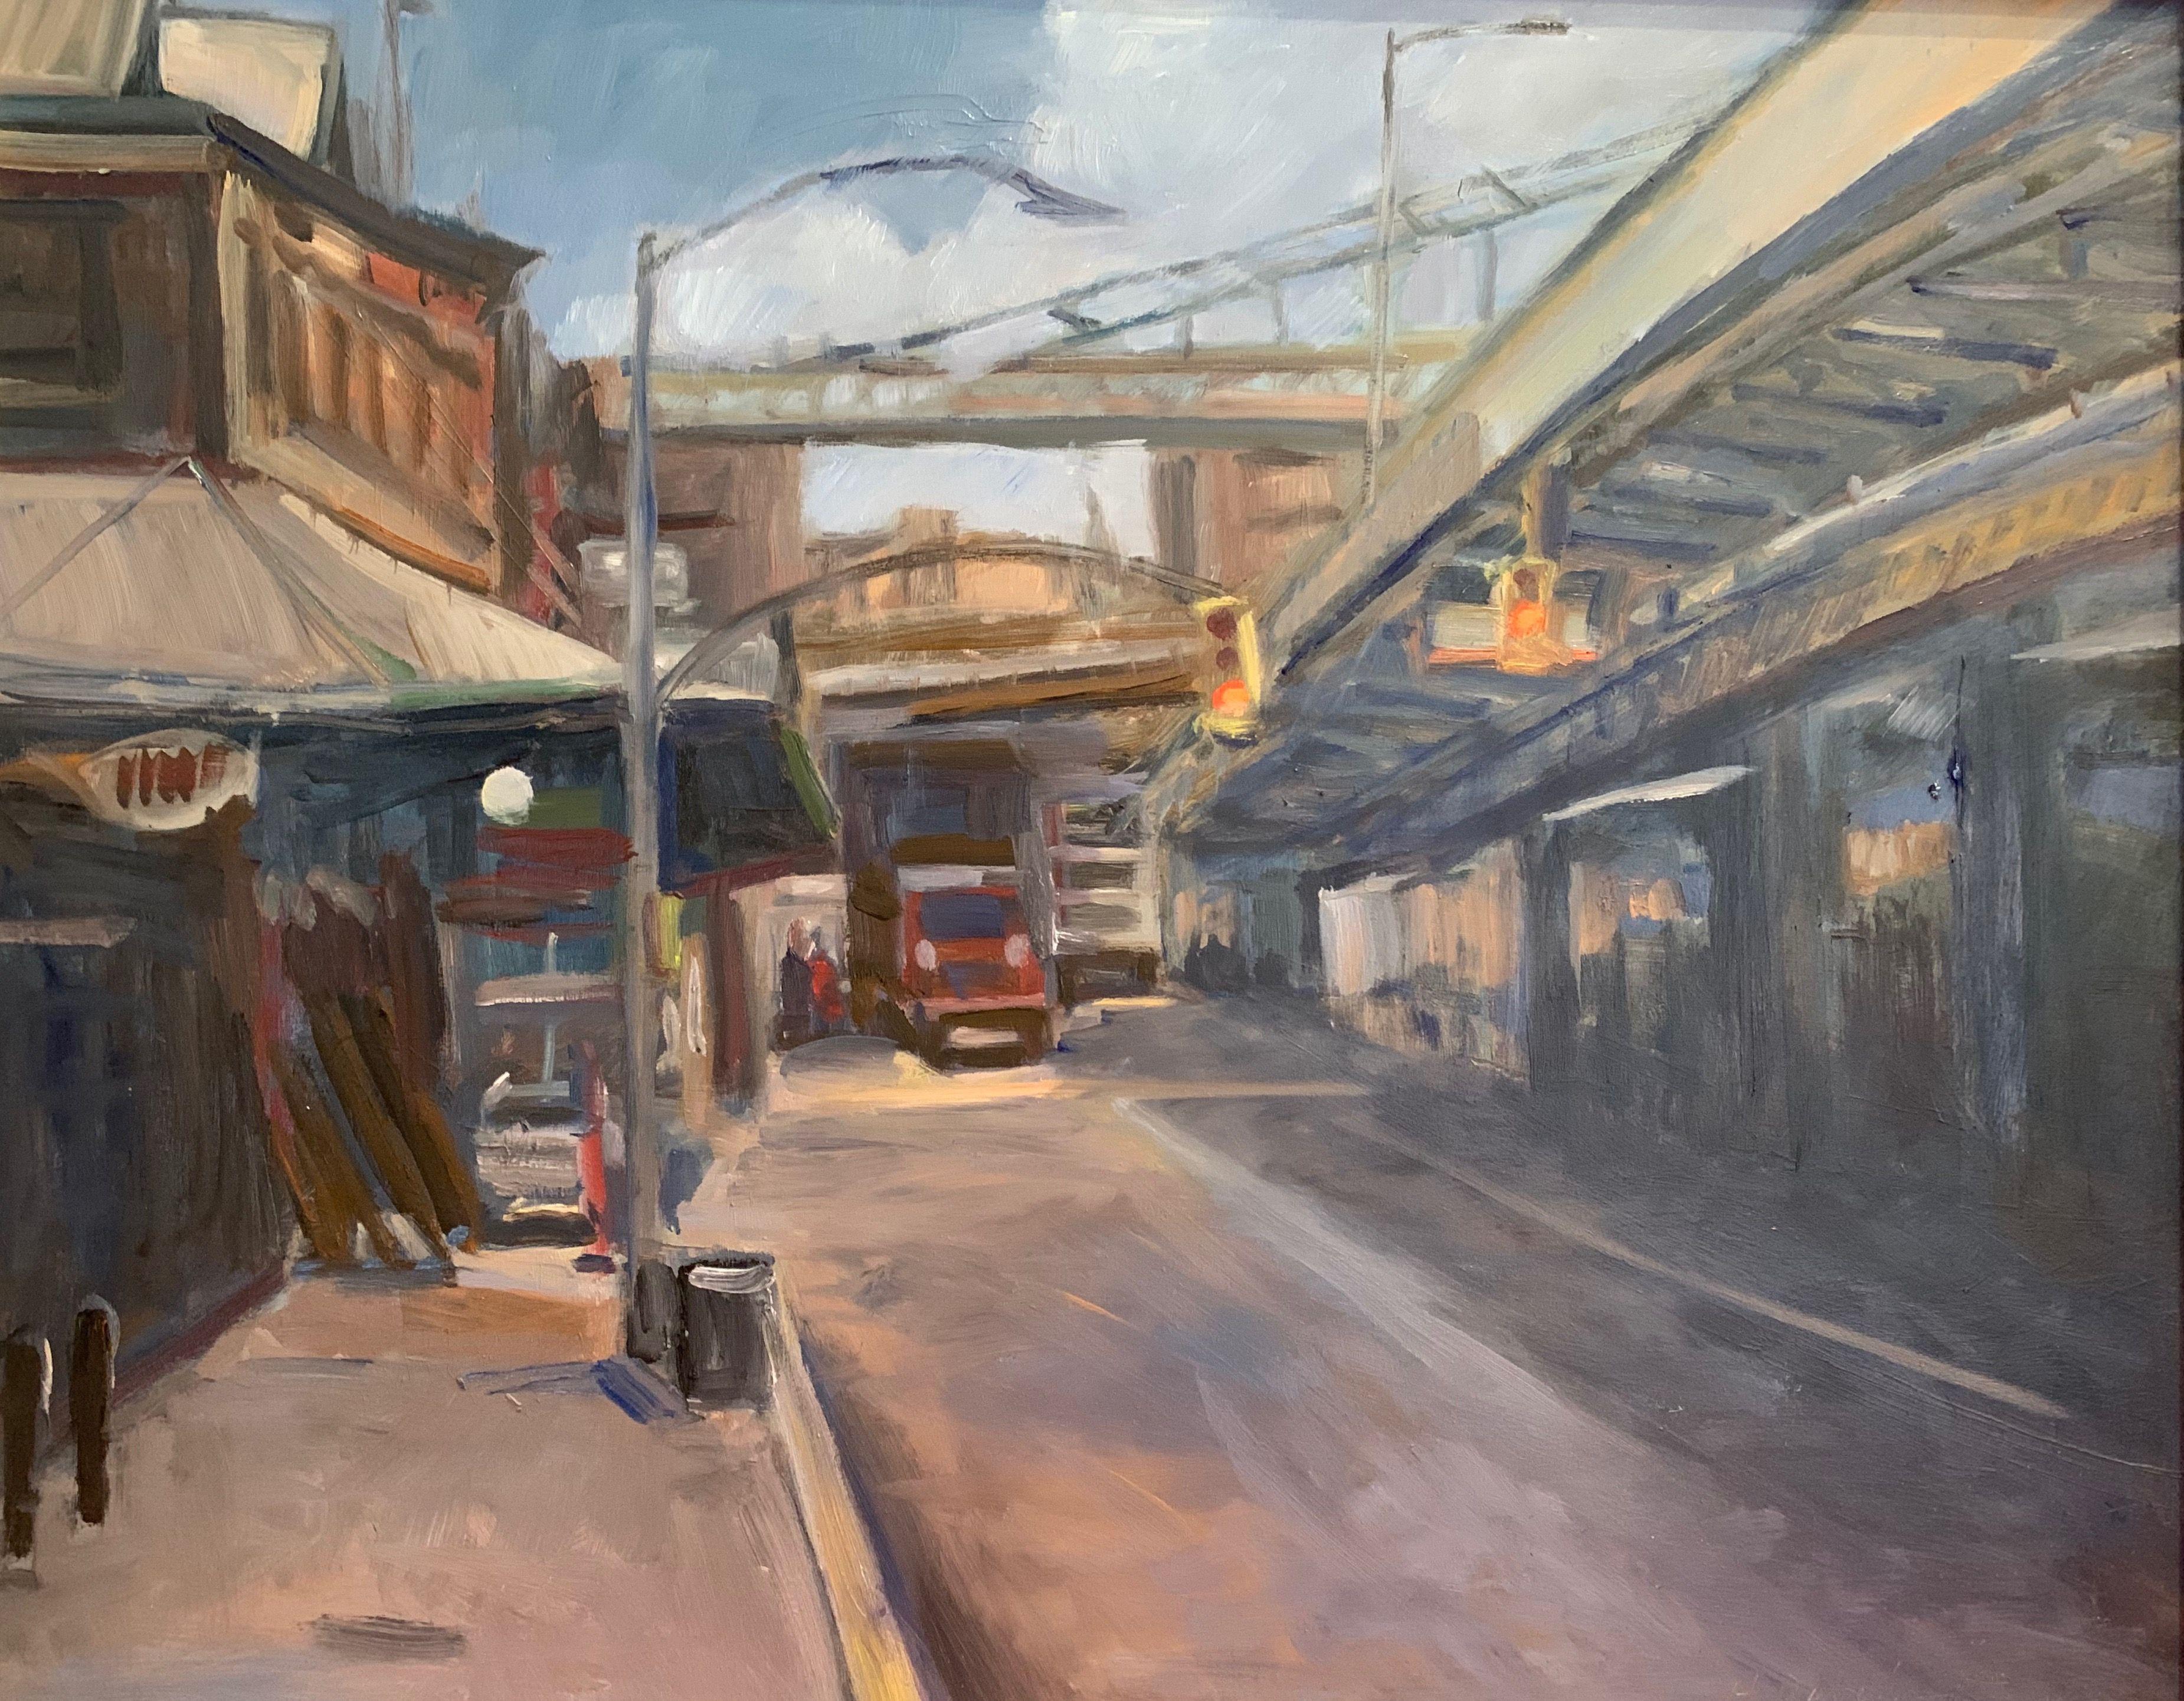 This painting captures the stillness alongside South Street Seaport.  We see a single truck about to pass underneath a street light. :: Painting :: Contemporary :: This piece comes with an official certificate of authenticity signed by the artist ::